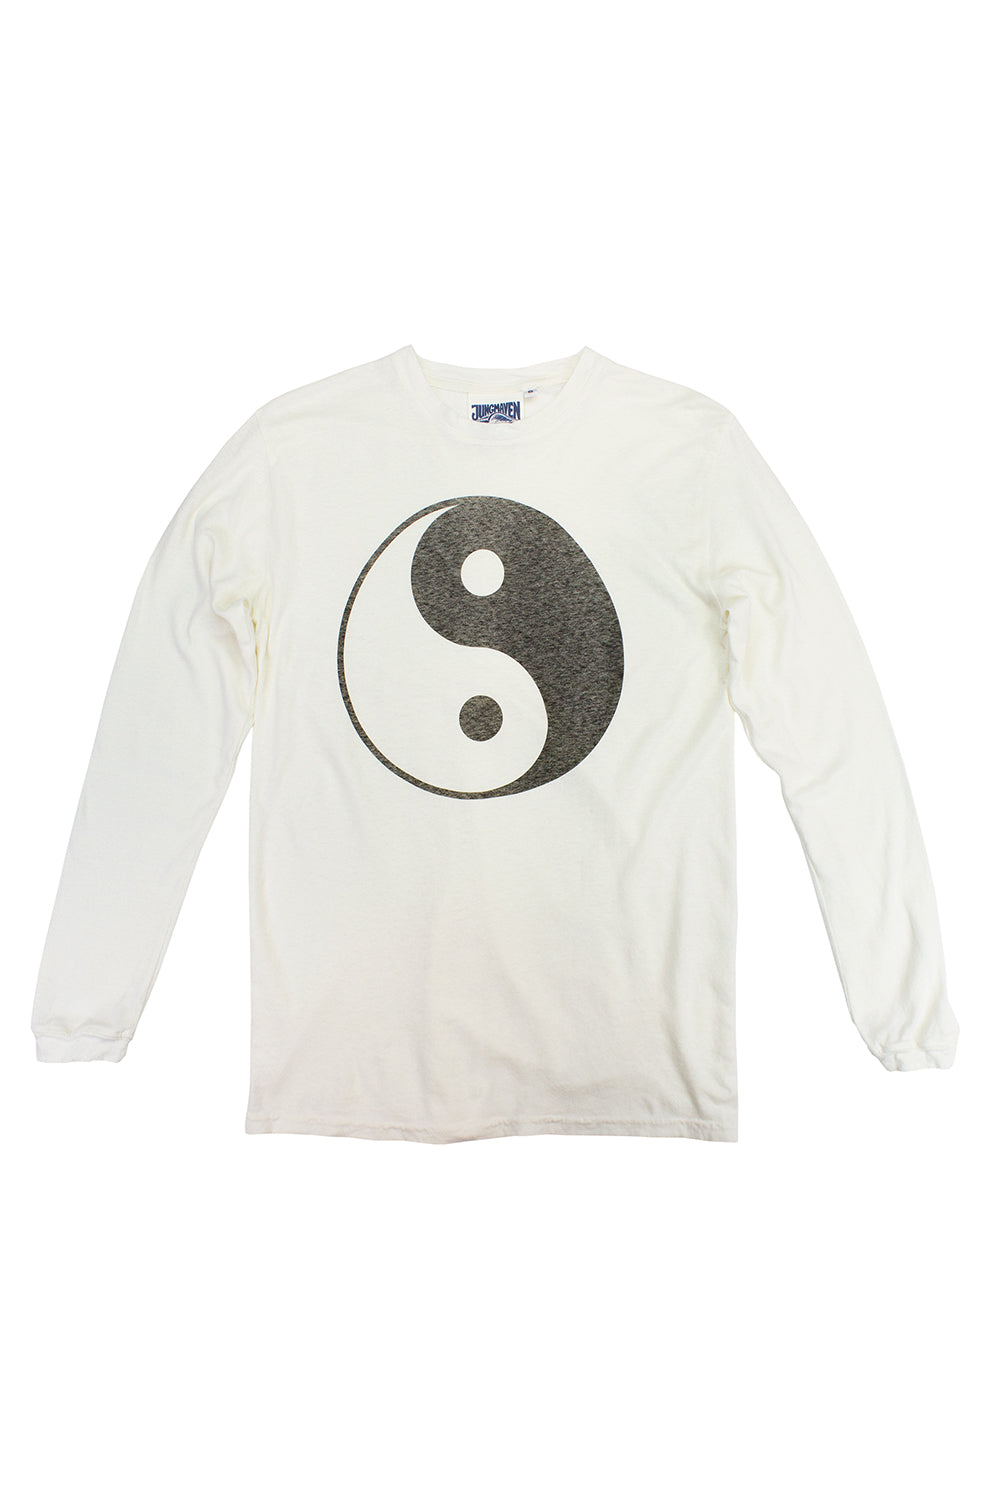 Yin Yang Jung Long Sleeve Tee | Jungmaven Hemp Clothing & Accessories / Color: Washed White